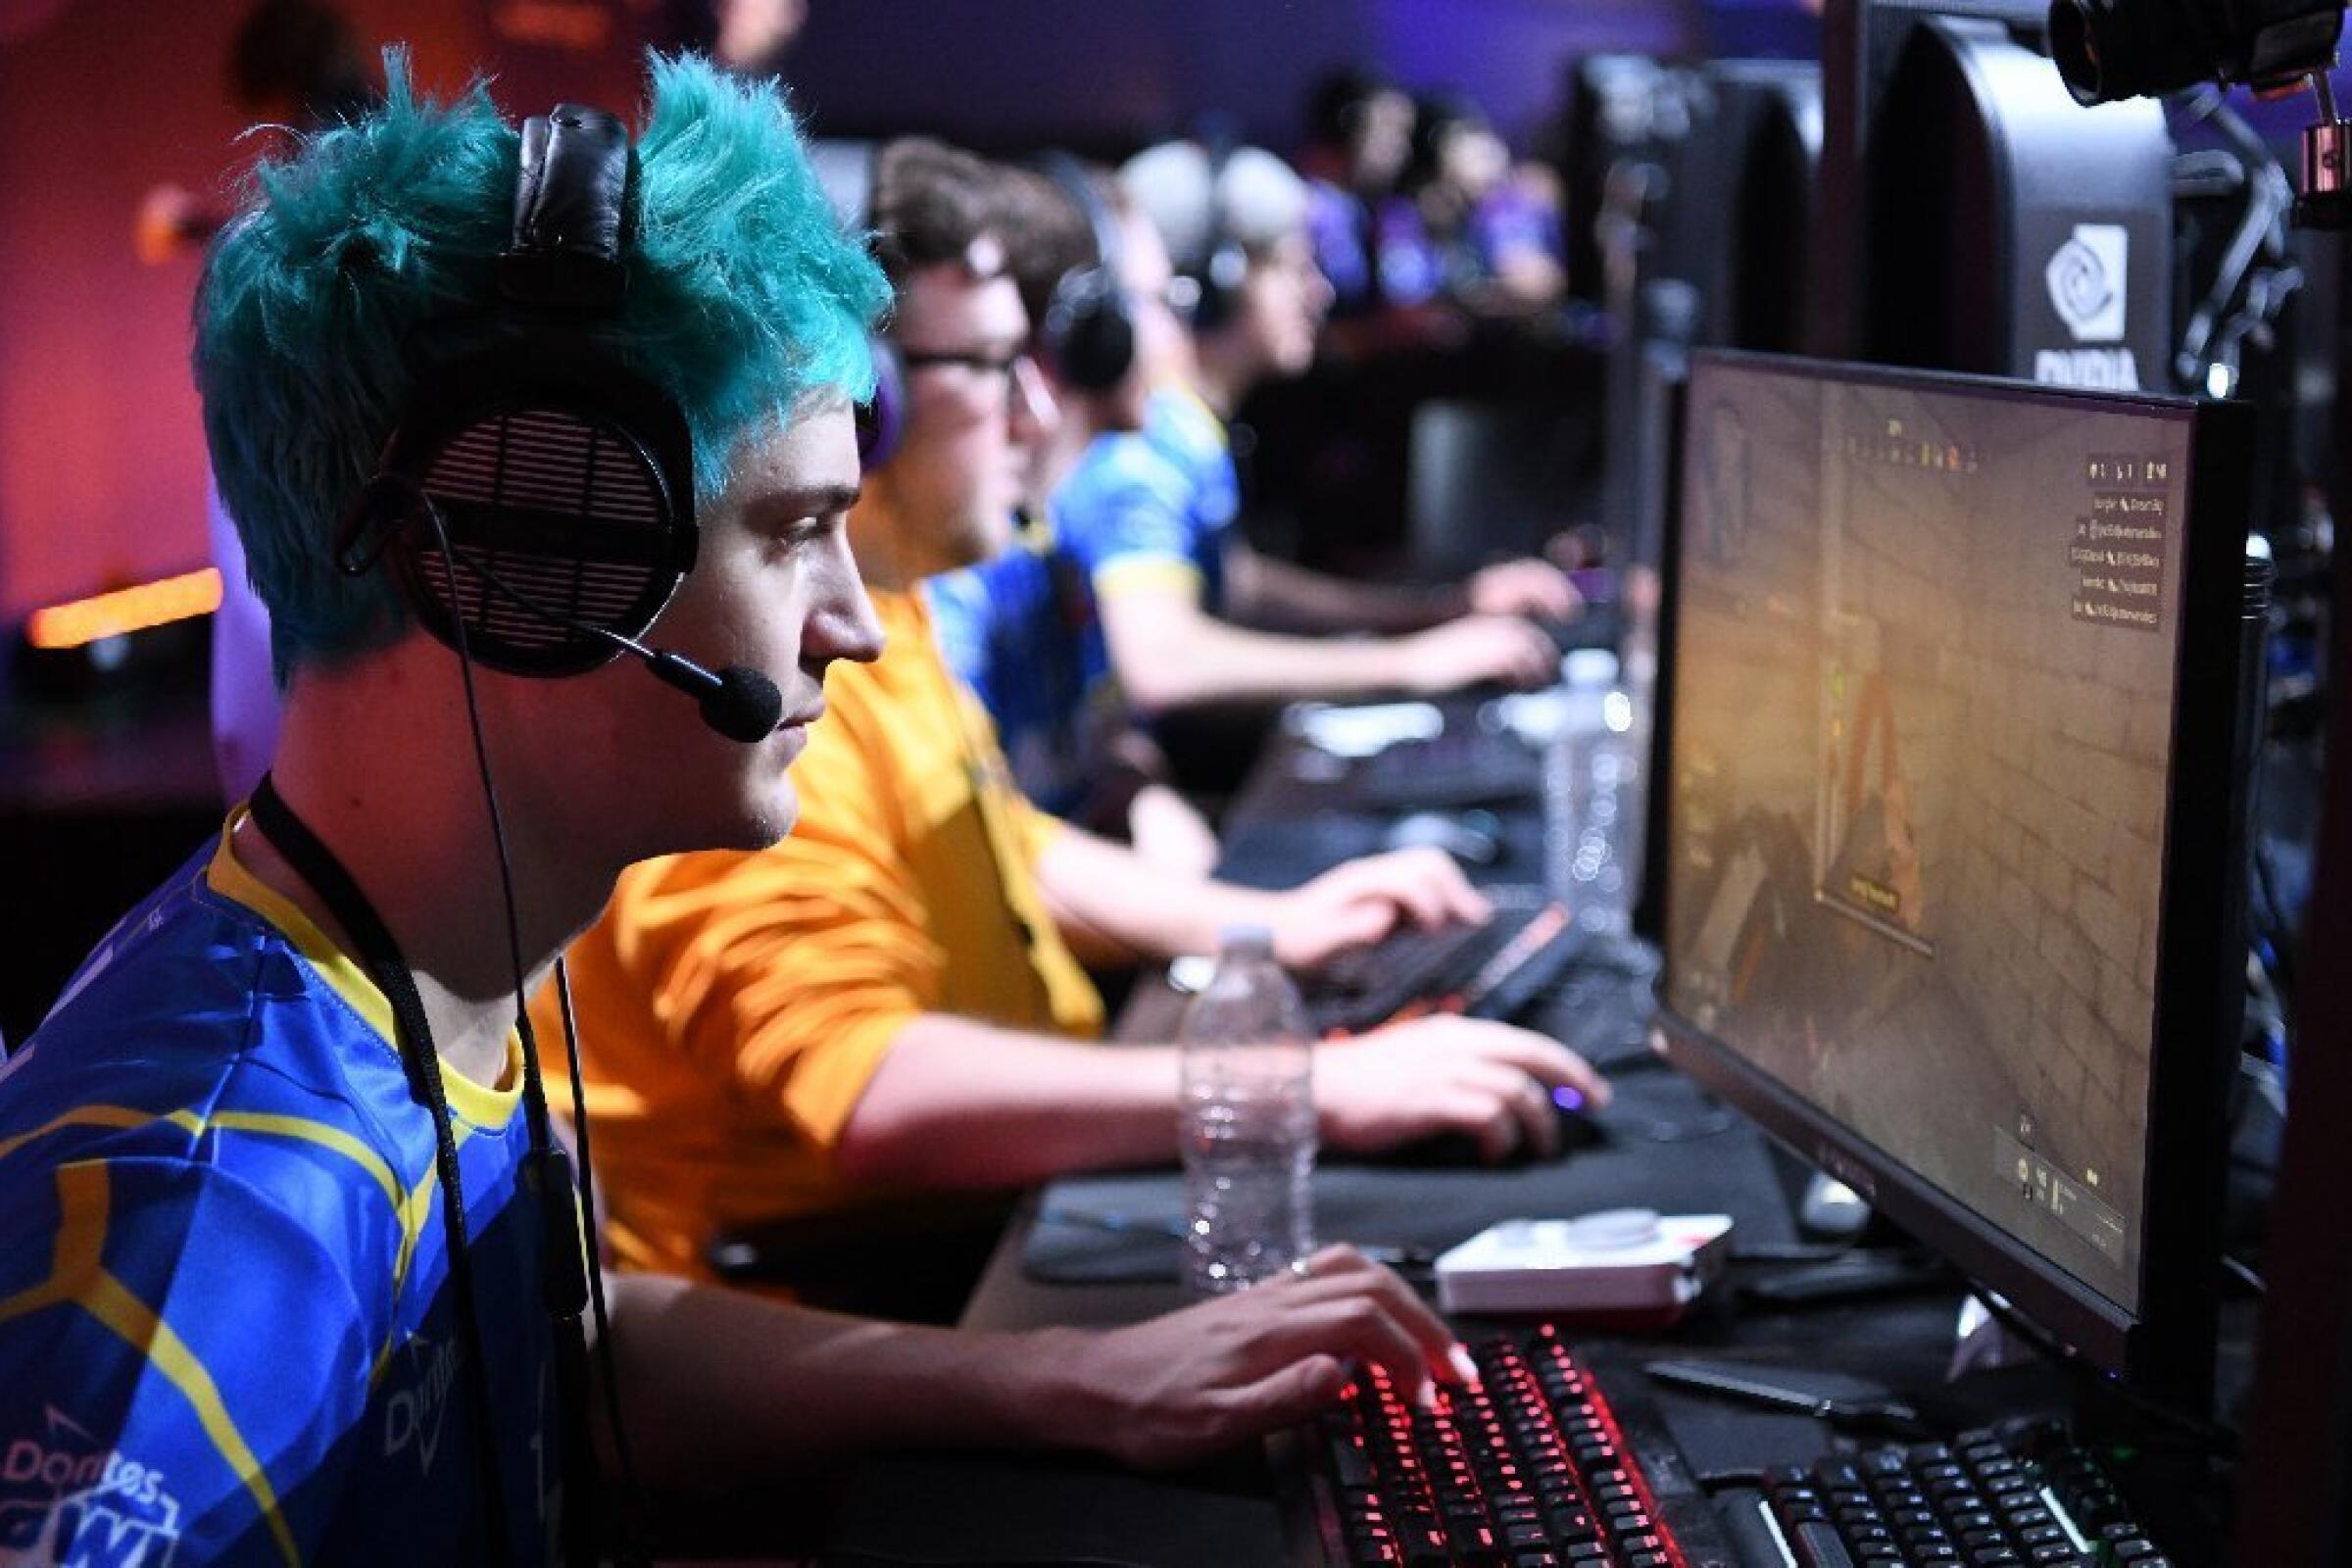 Tyler "Ninja" Blevins, one of Twitch's most popular gamers before moving platforms earlier this year, plays Call of Duty: Black Ops 4 during the Doritos Bowl 2018 at TwitchCon 2018.